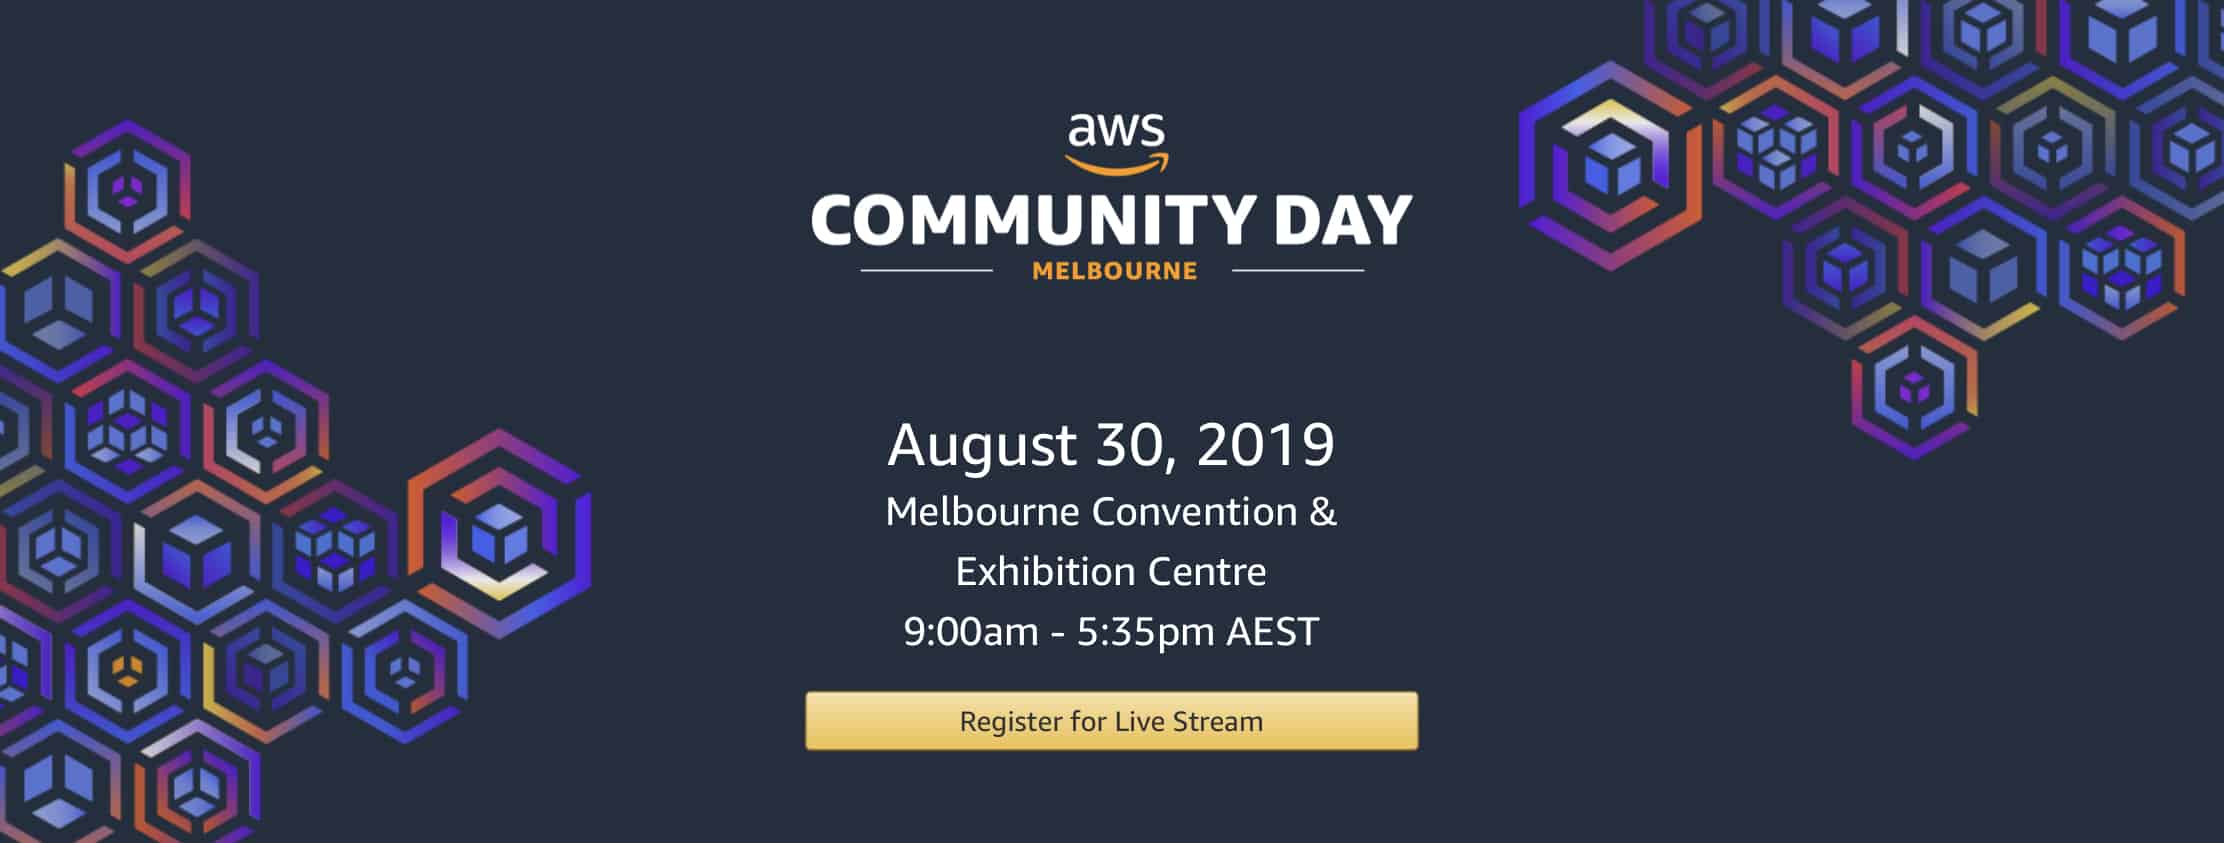 AWS Community Day Melbourne